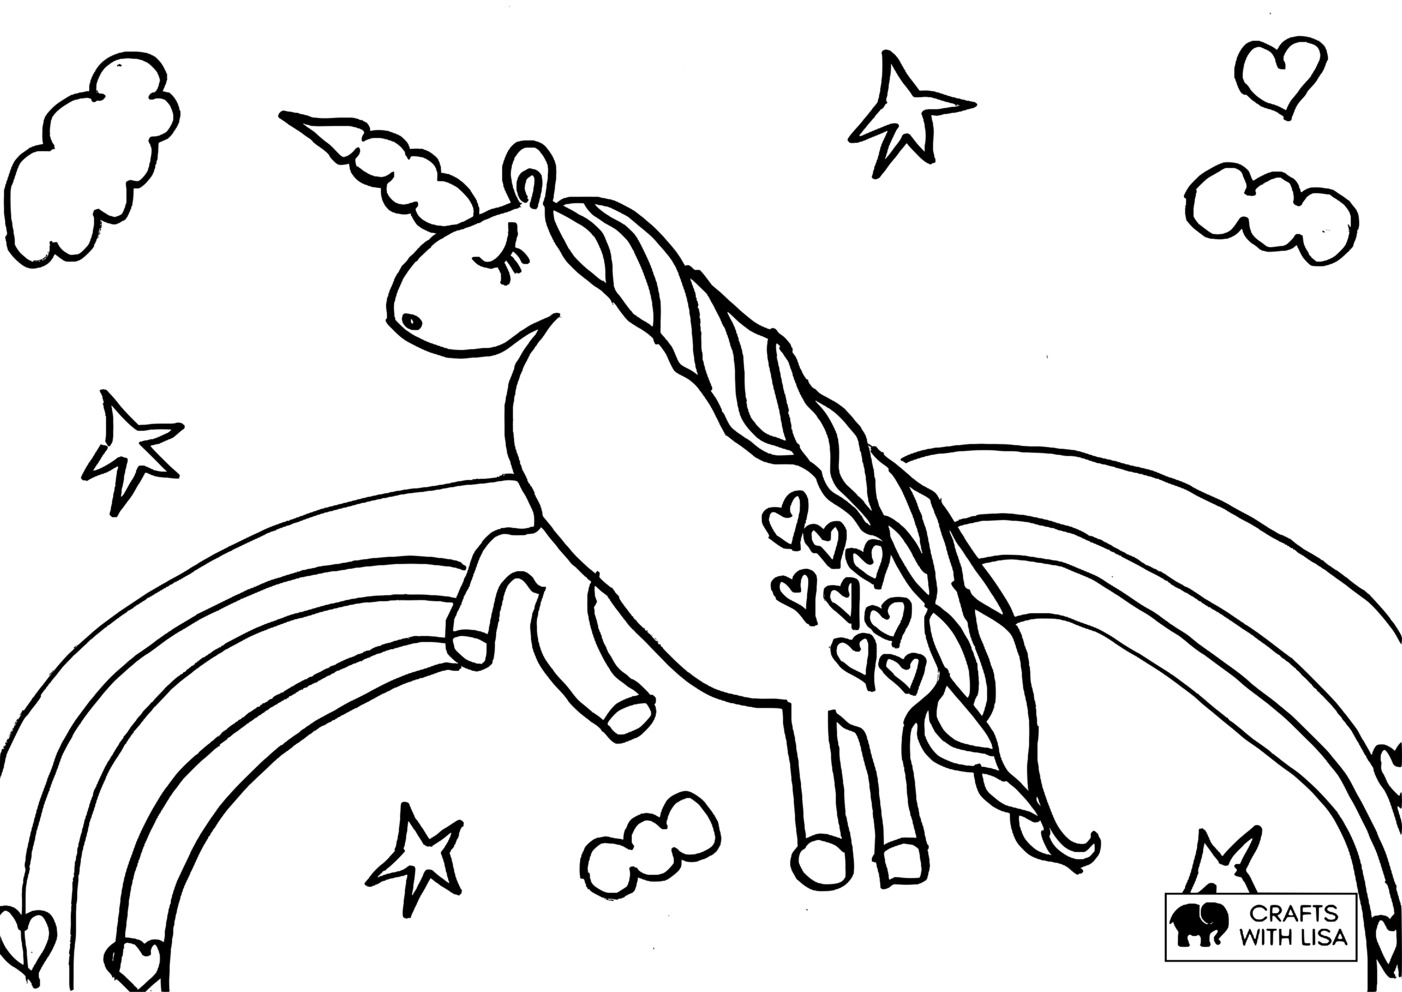 kids coloring pages and crafts